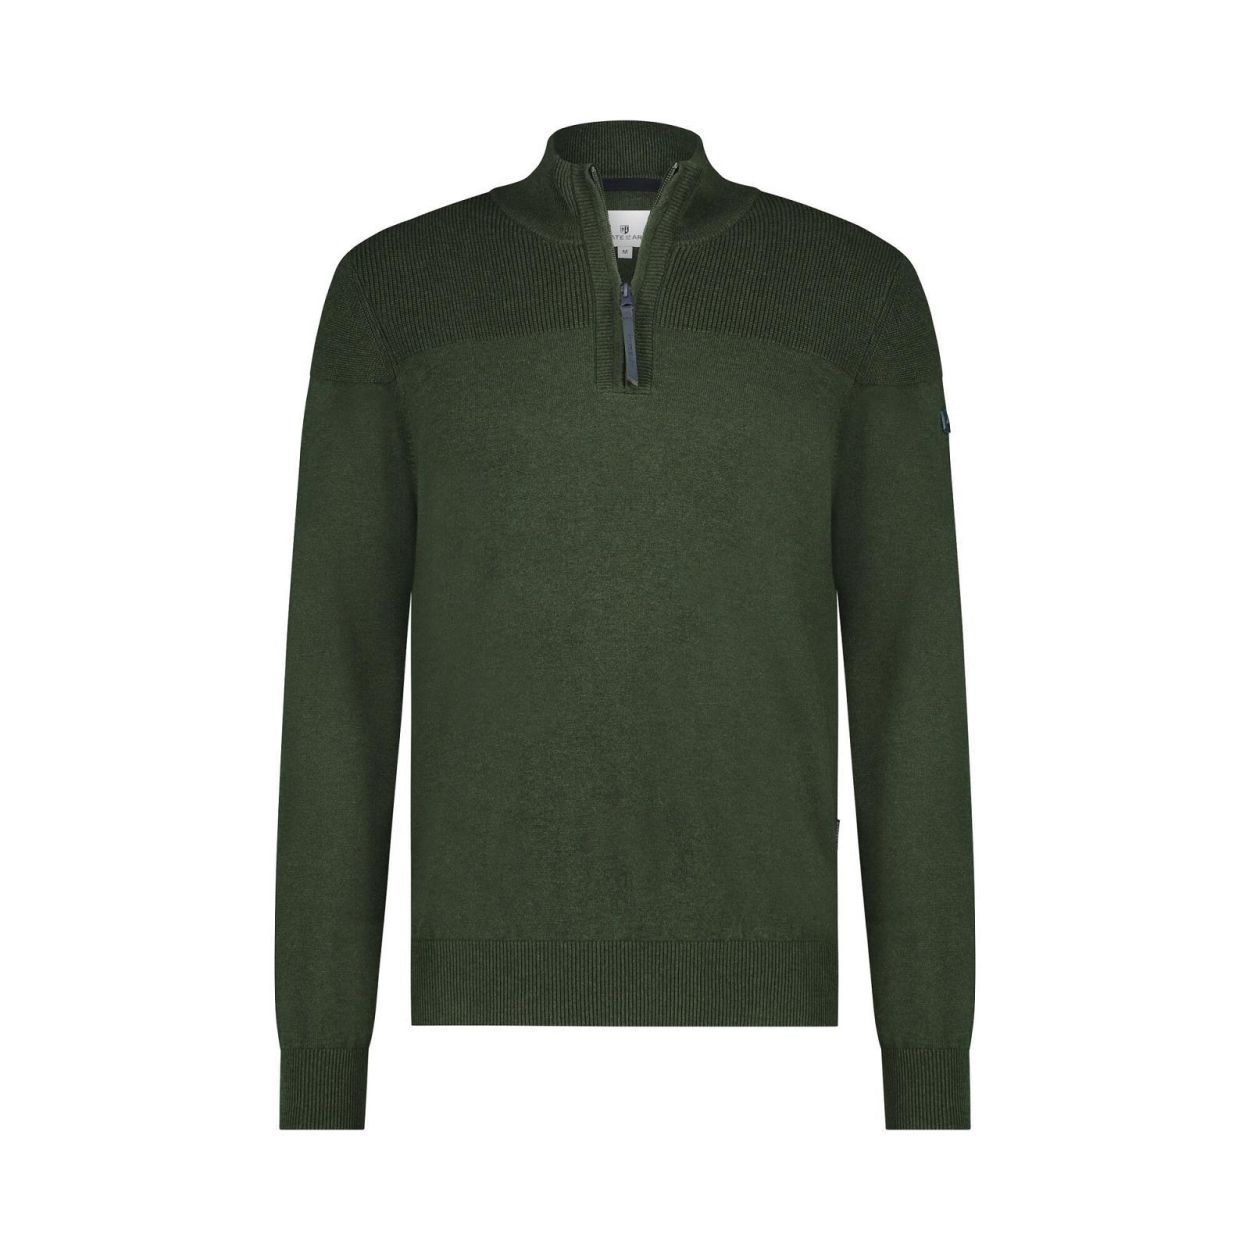 State of Art Pullover Sportzip Plain WD (131-23816-3700) - WeekendMode